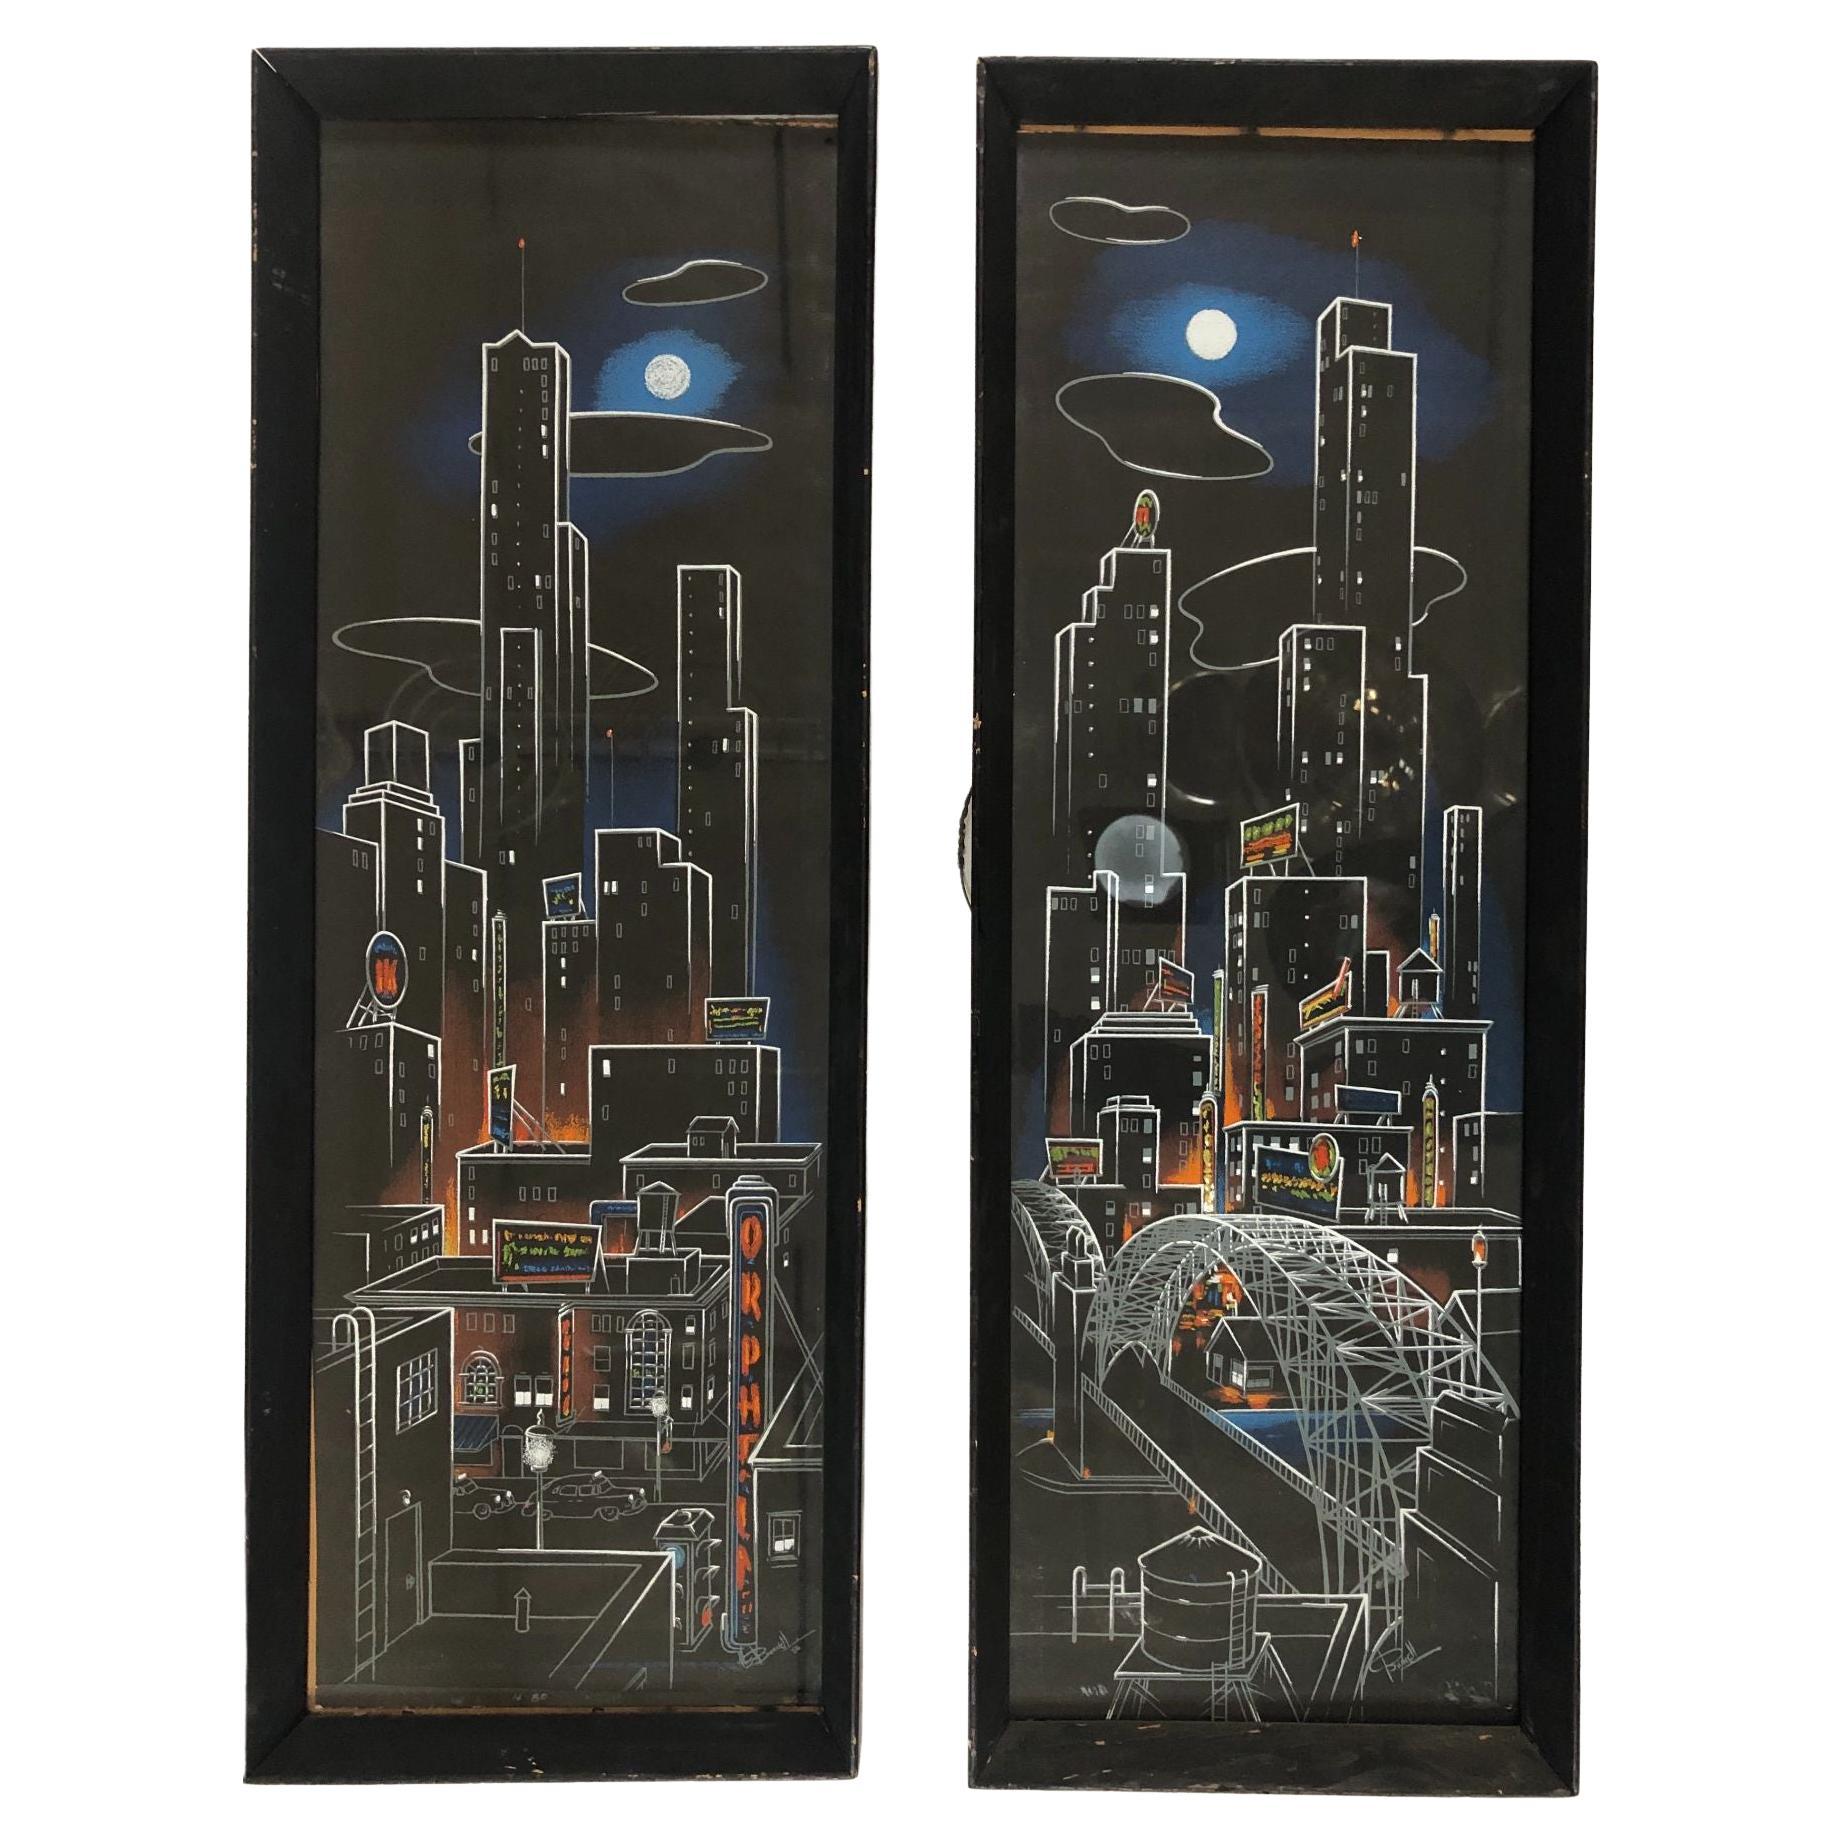 Charles Ragland Bunnell "Large Cityscape" Silkscreen Signed Bunnell Set of 2